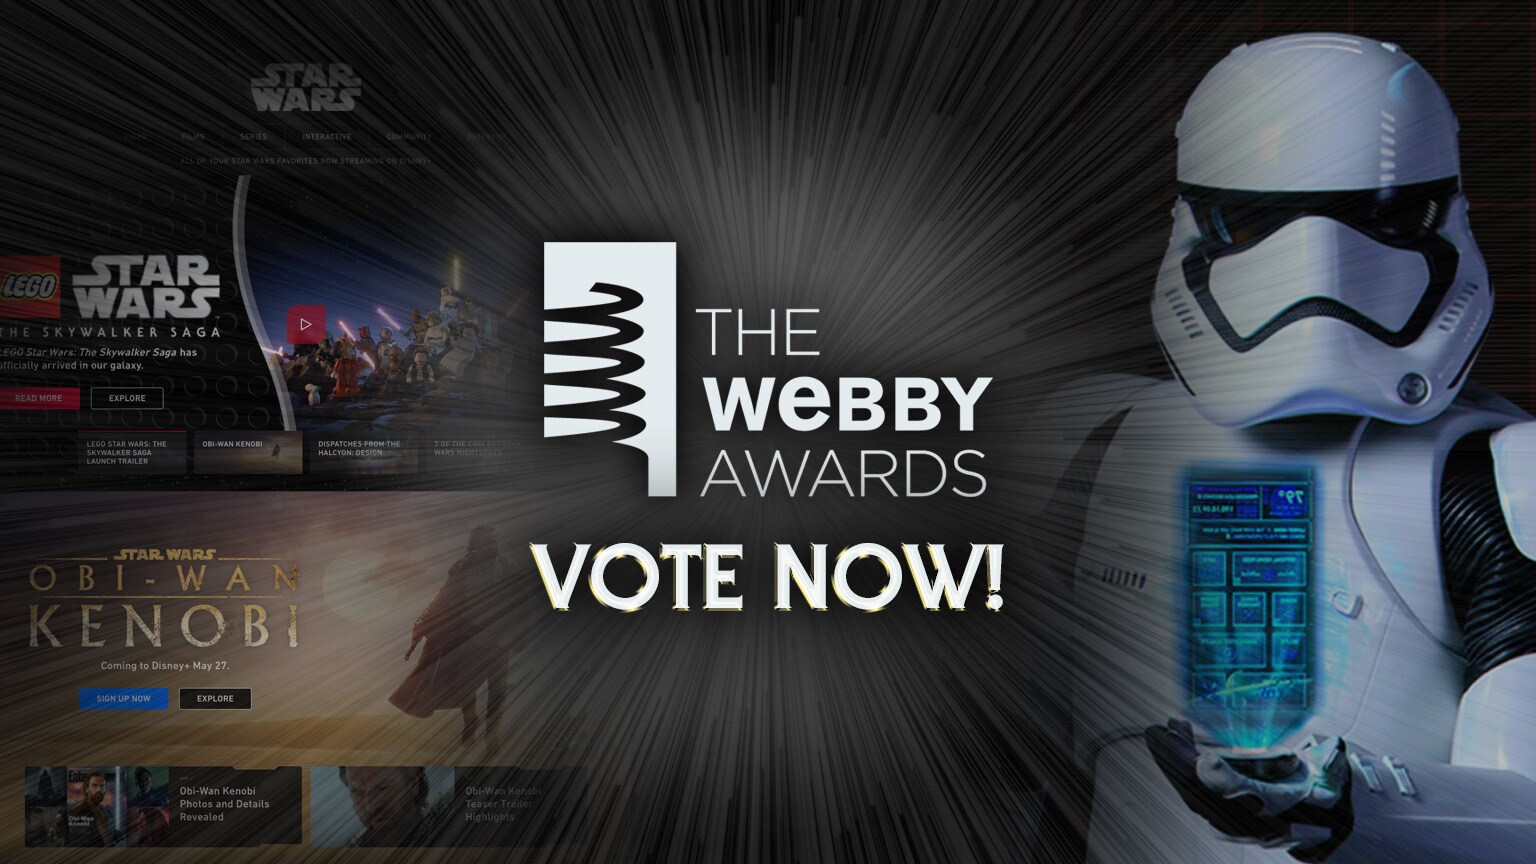 Vote for Star Wars in the 2022 Webby Awards